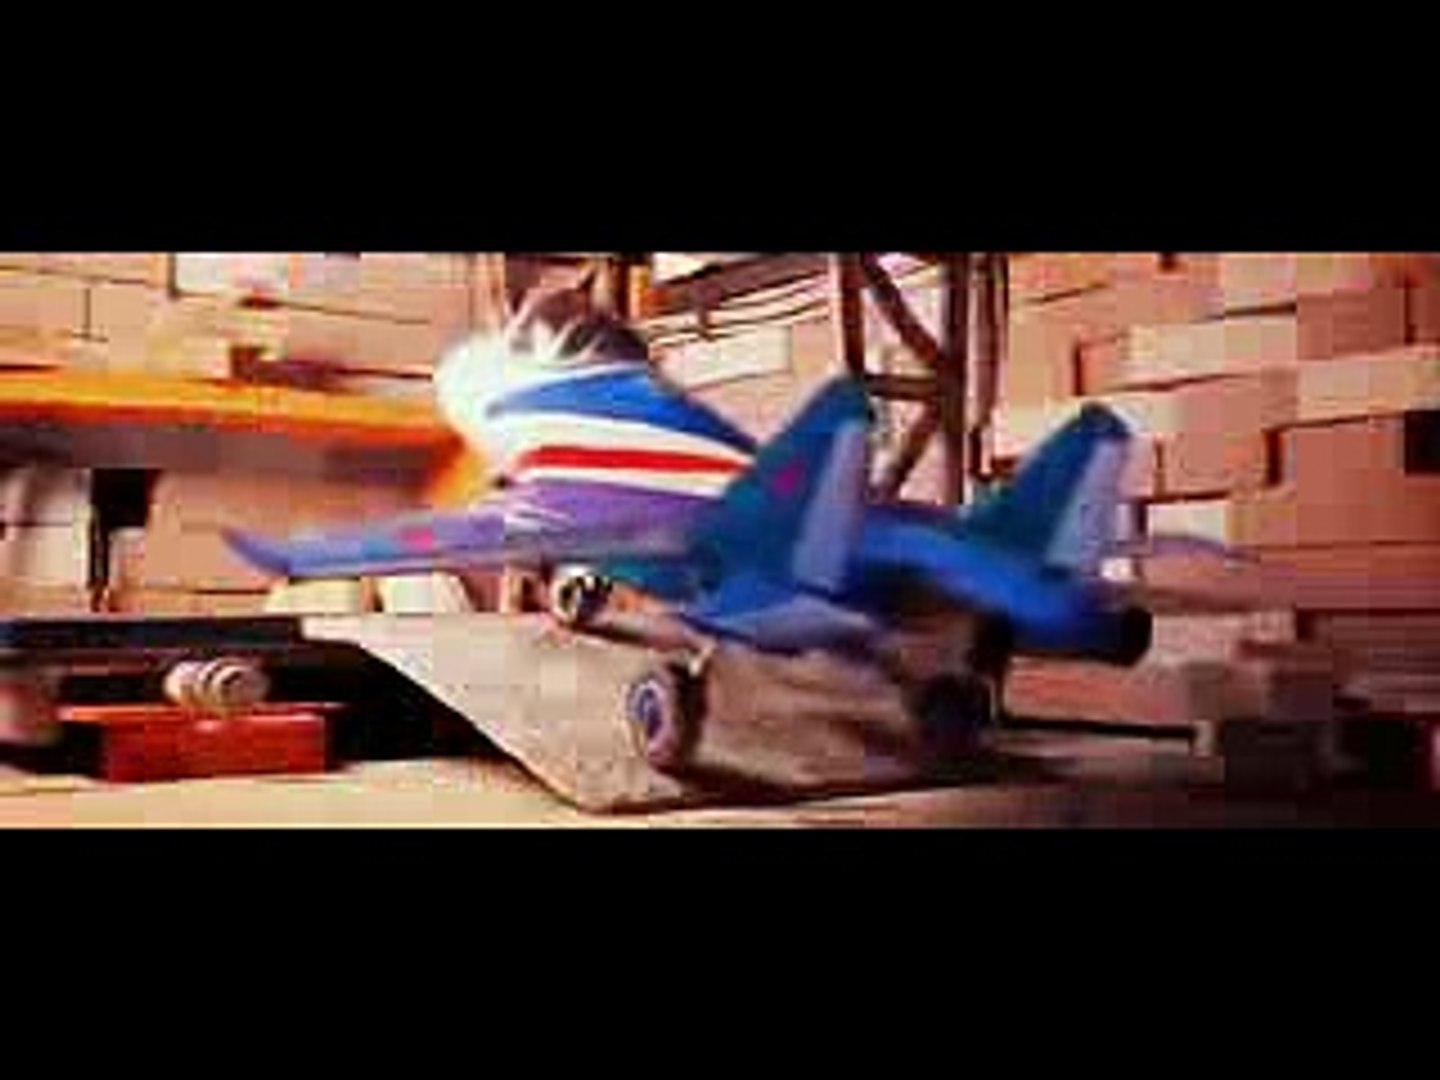 ---Animation movies 2014 full movies - Cartoon network - Animated Comedy Movies - Cartoons For Child